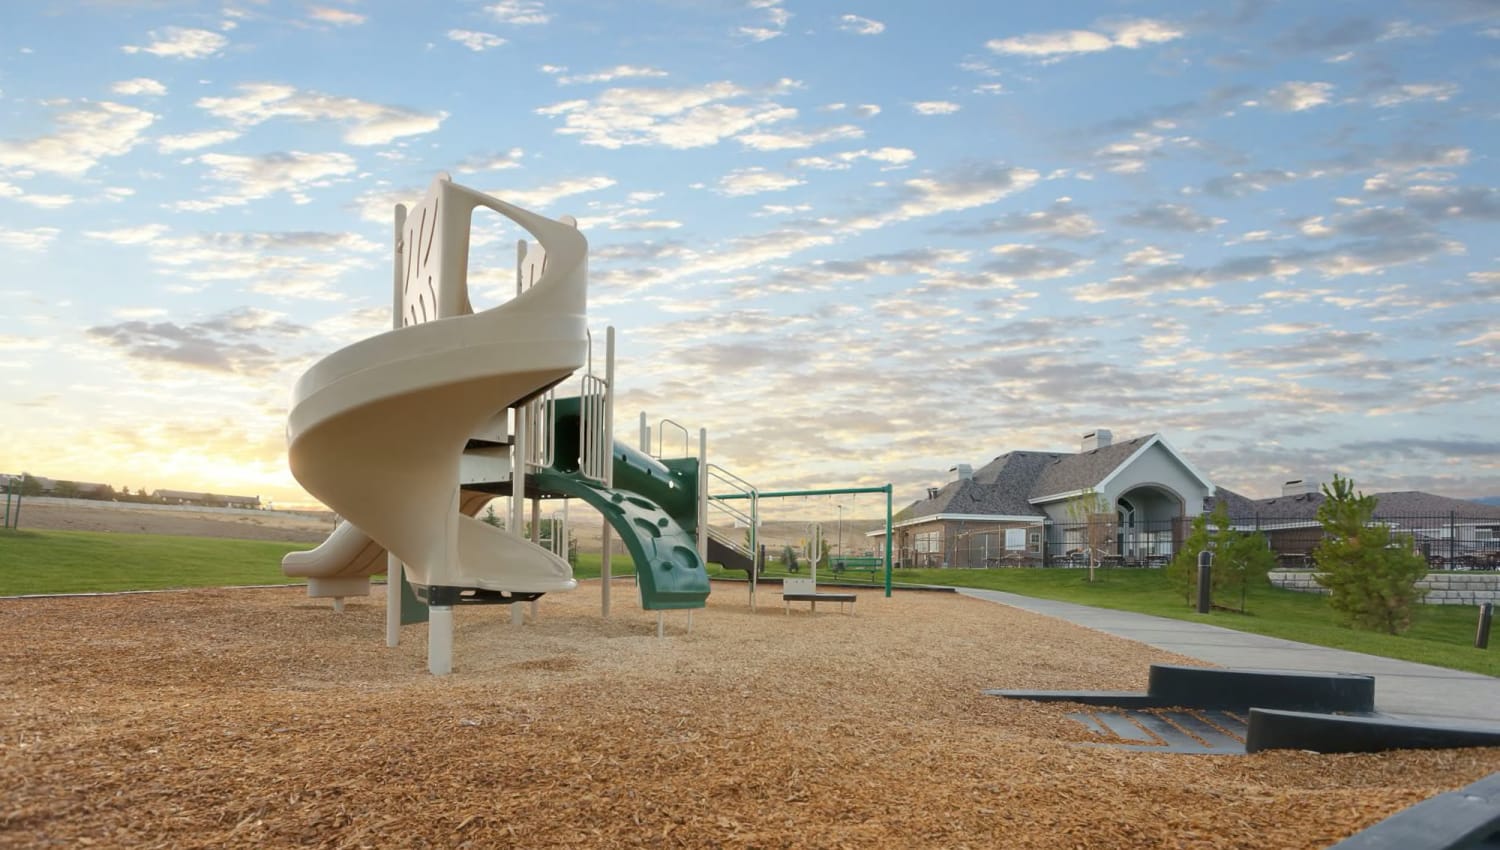 Children's playground at The Preserve at Greenway Park in Casper, Wyoming